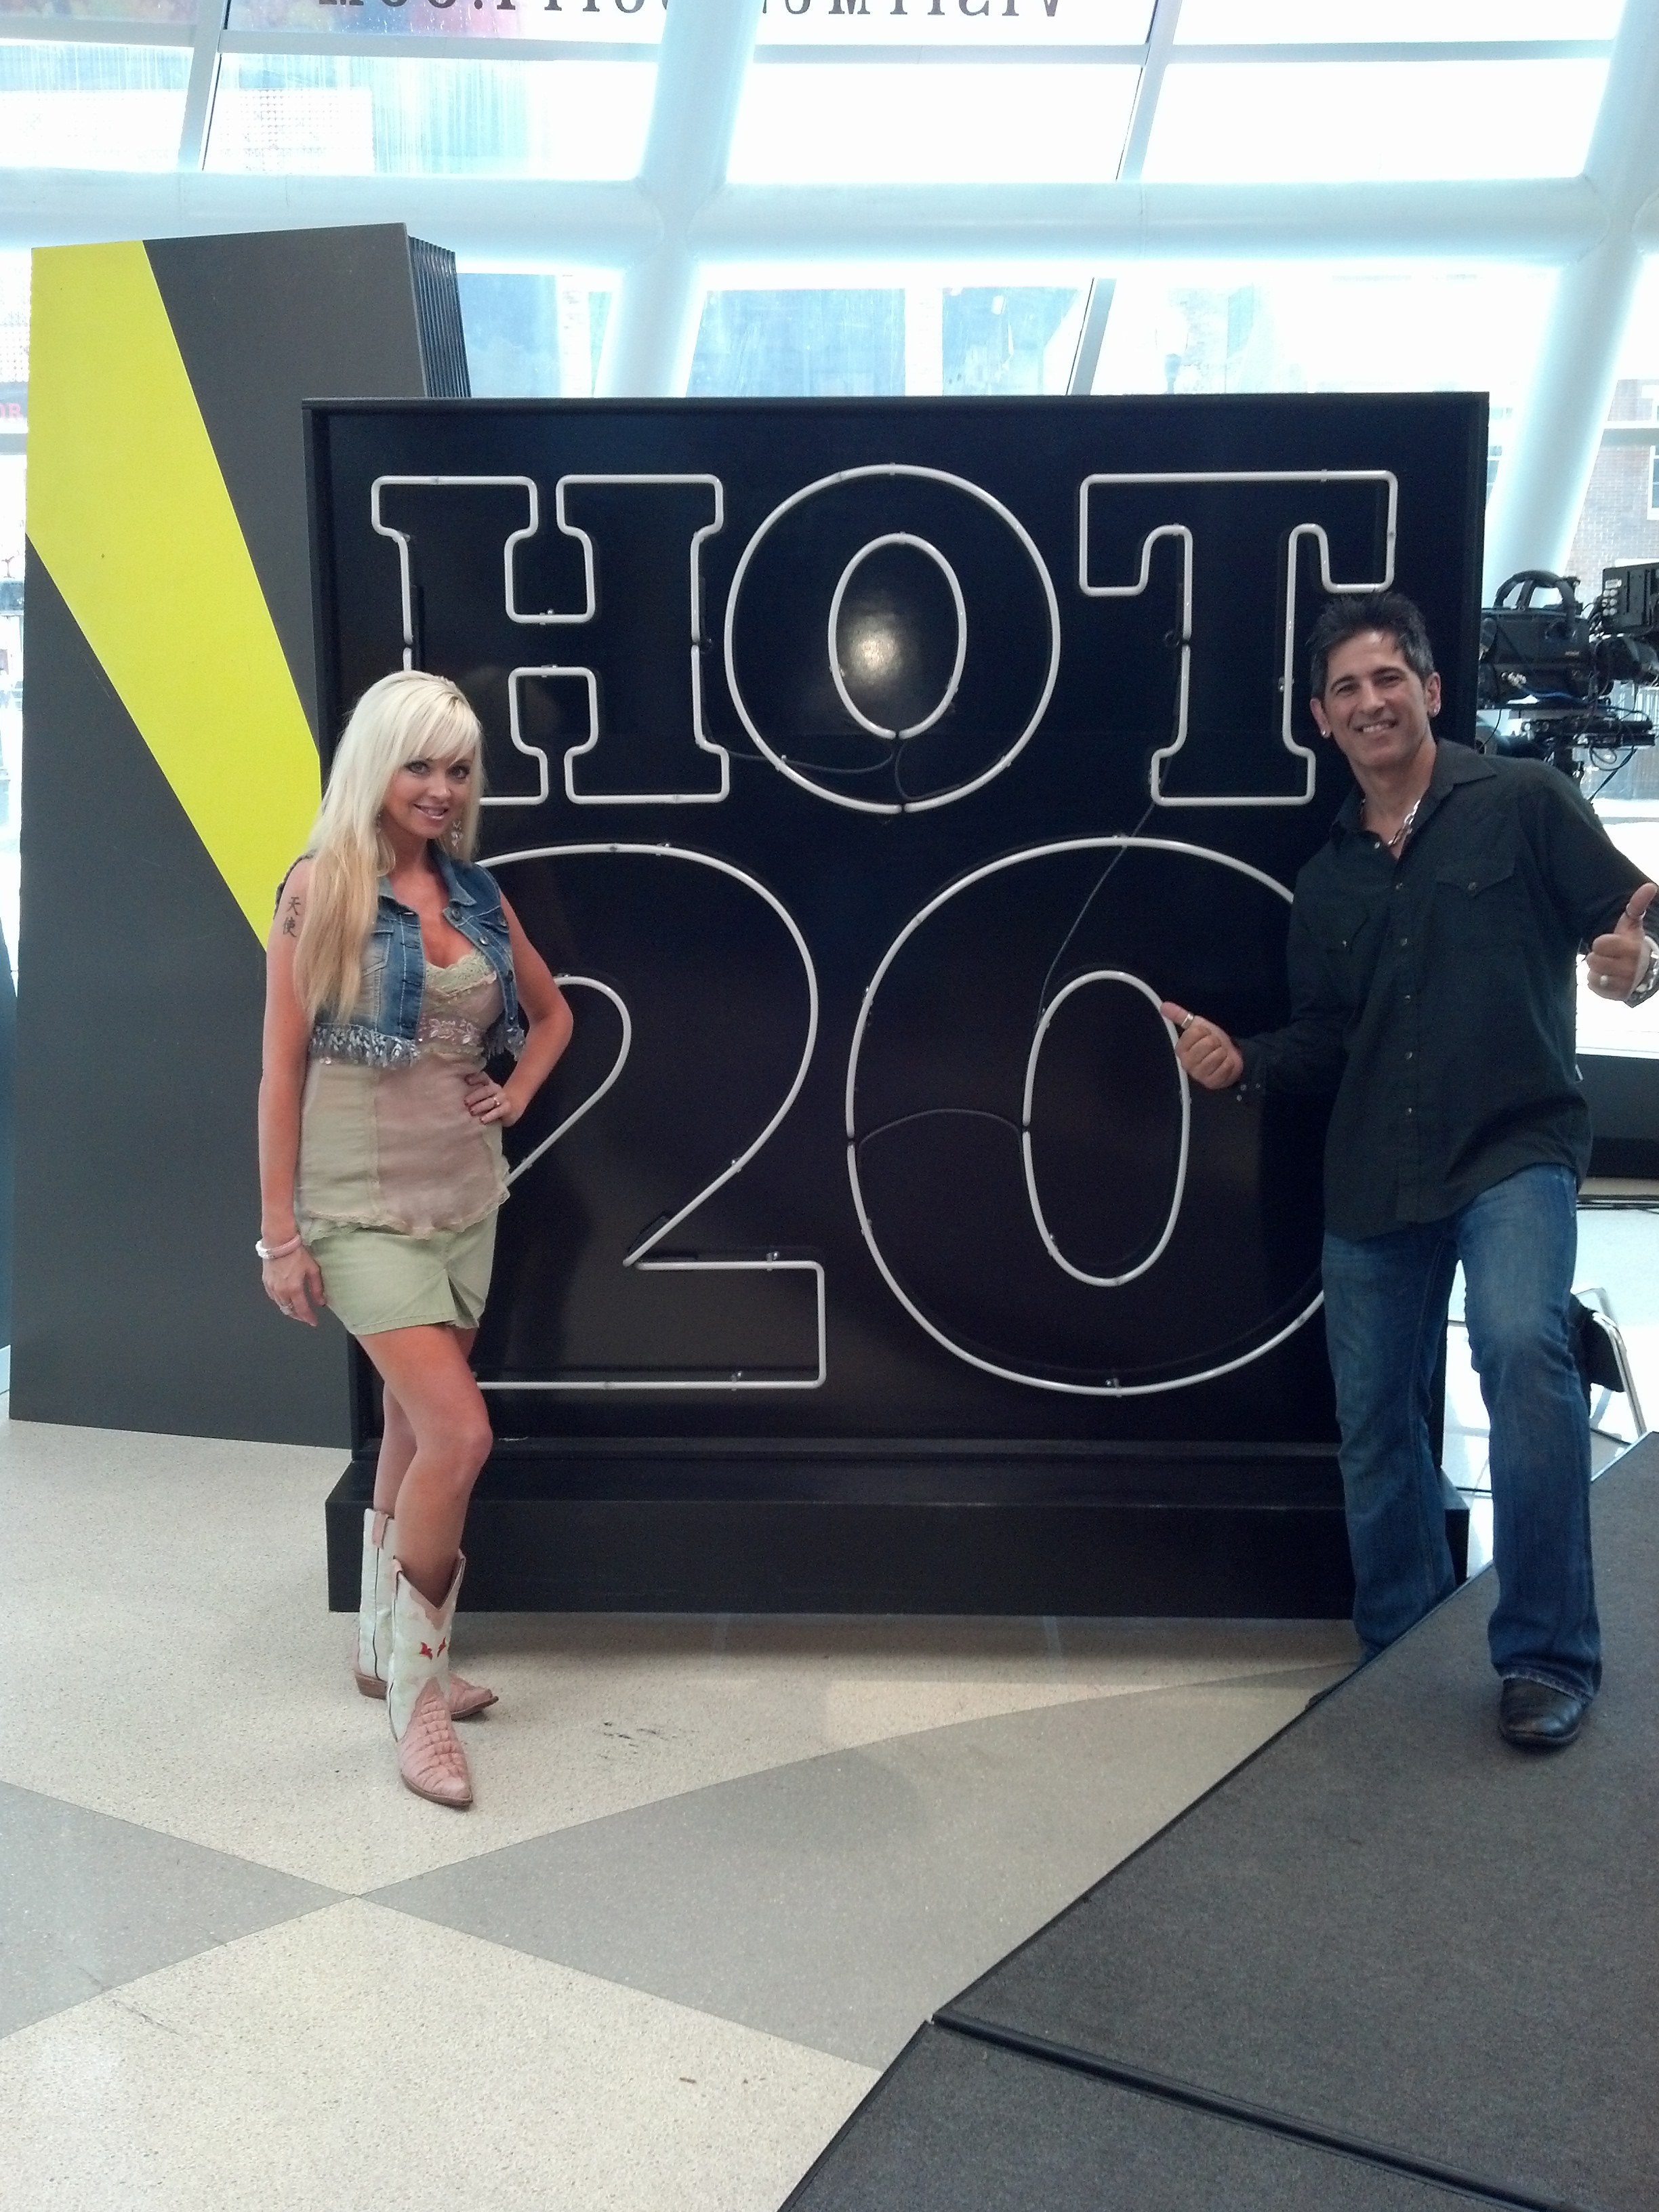 CMT HOT 20 COUNTDOWN